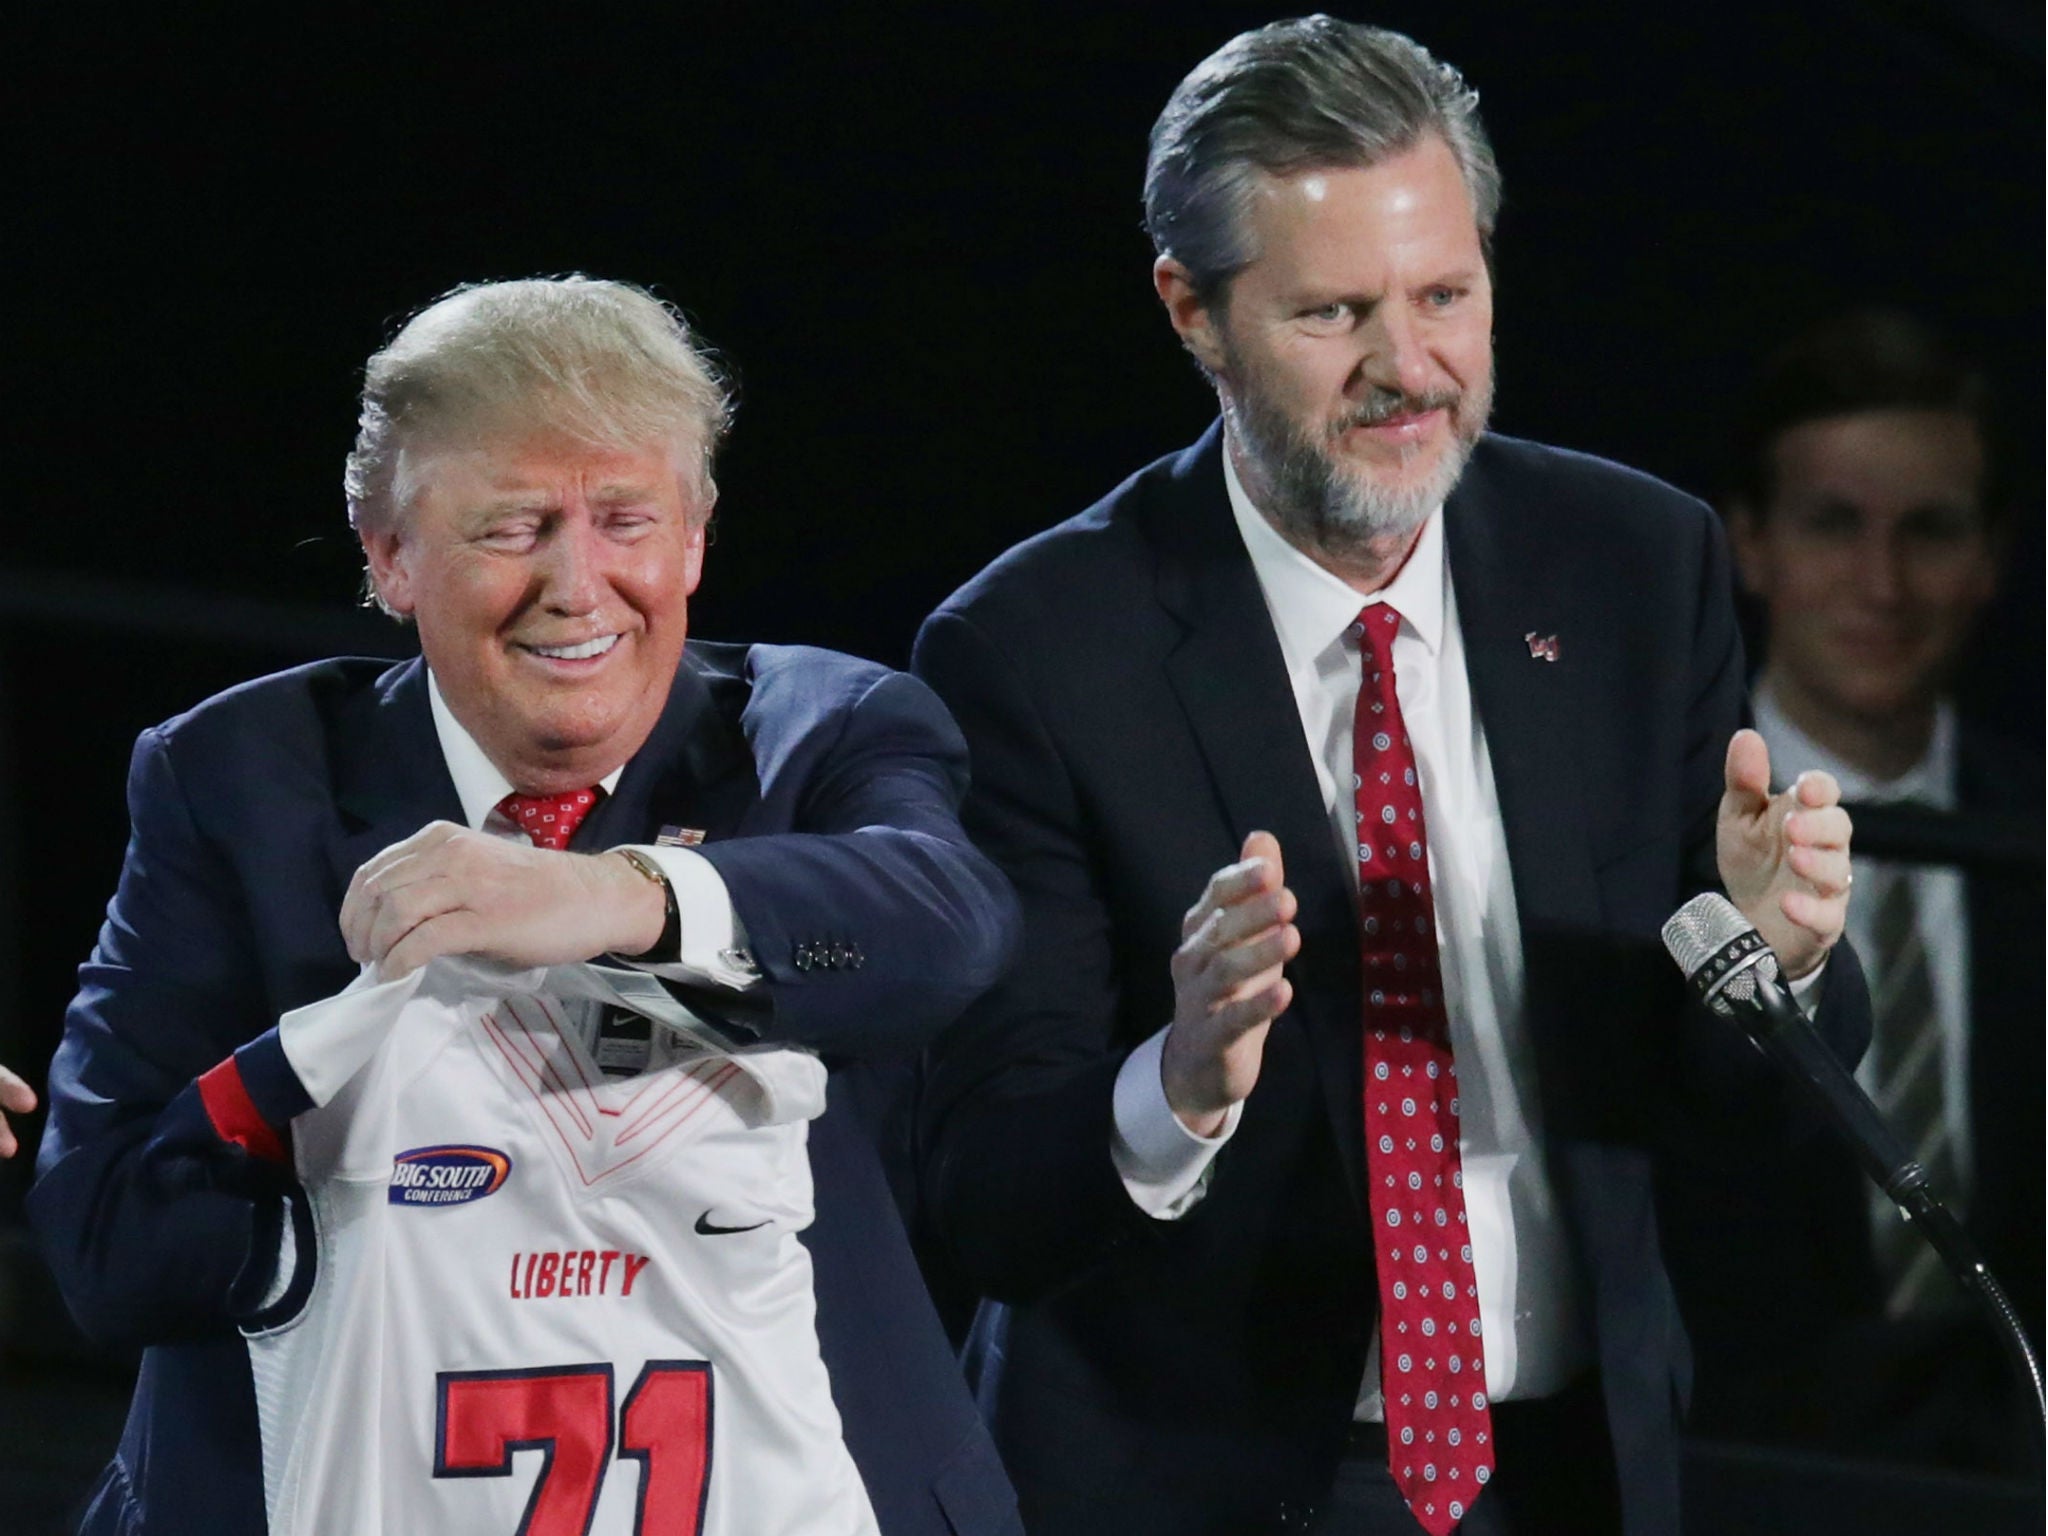 Donald Trump and Jerry Falwell Jr.'s good relations have lasted years